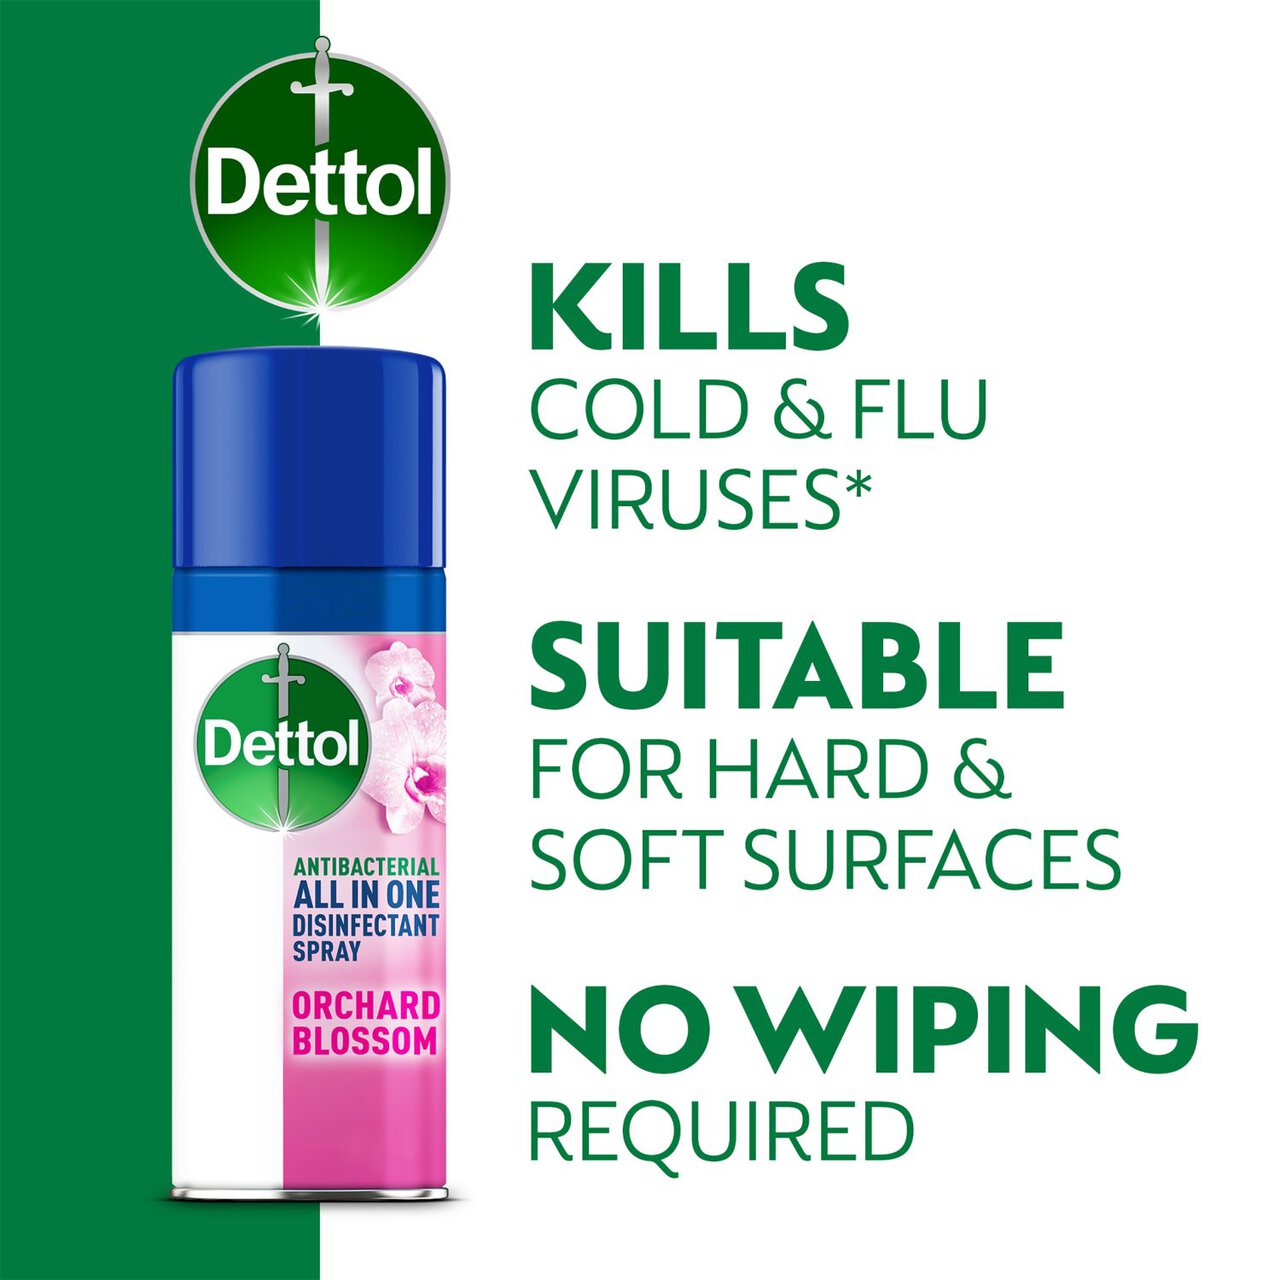 Dettol All In One Disinfectant Antibacterial Spray Orchard Blossom 400ml